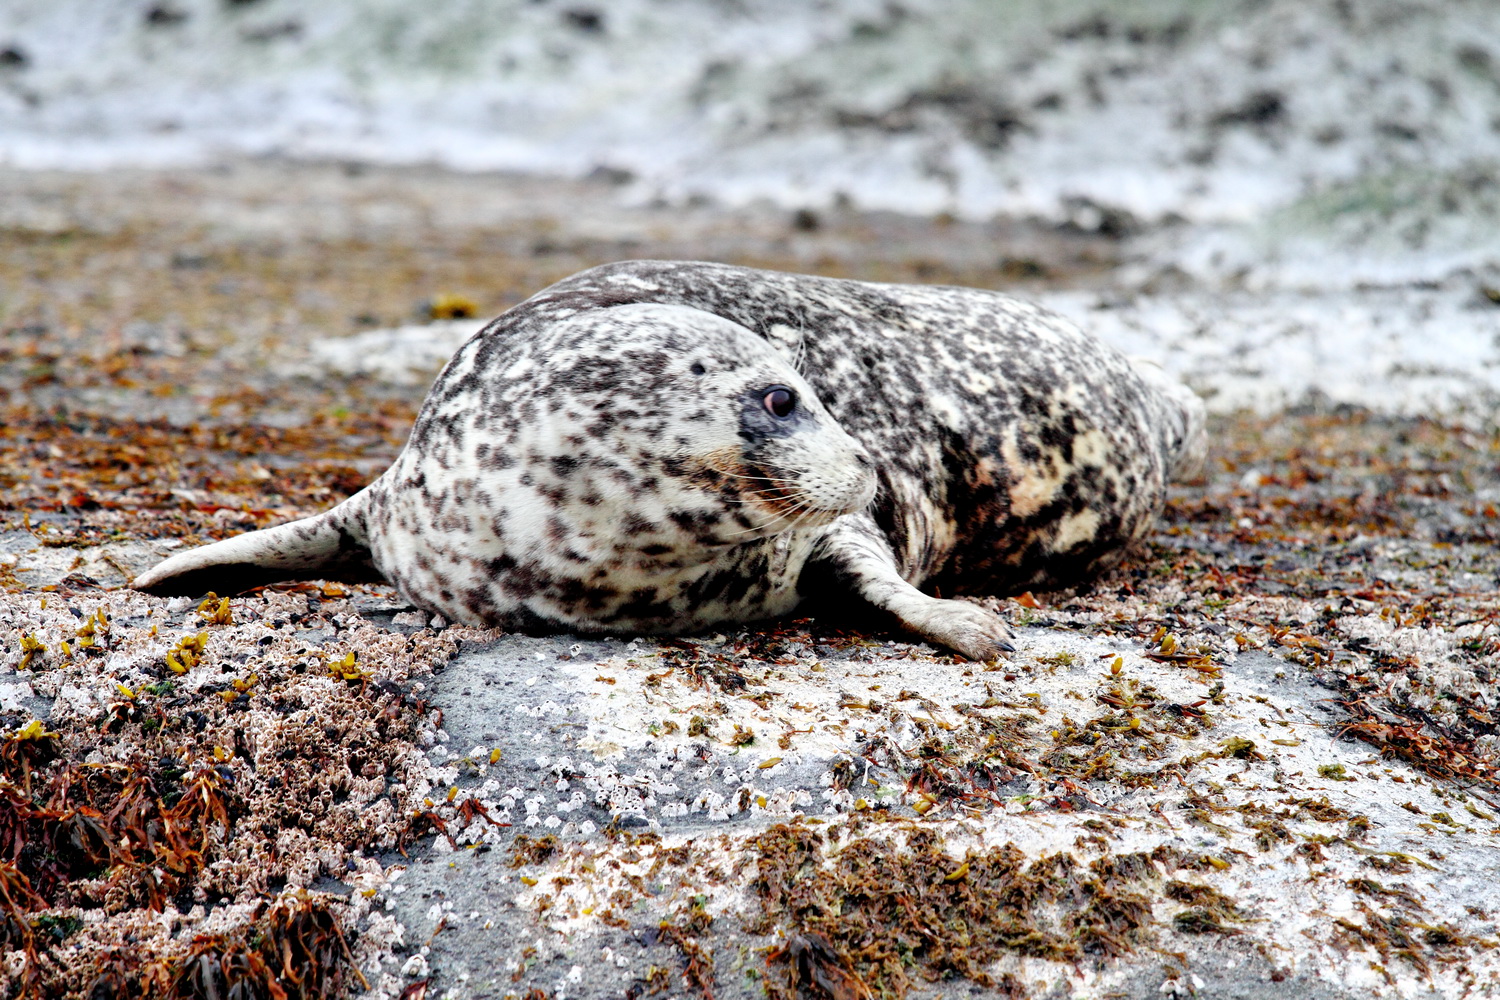 Harbor seal on the reef. Photo by Evgeny Mamaev